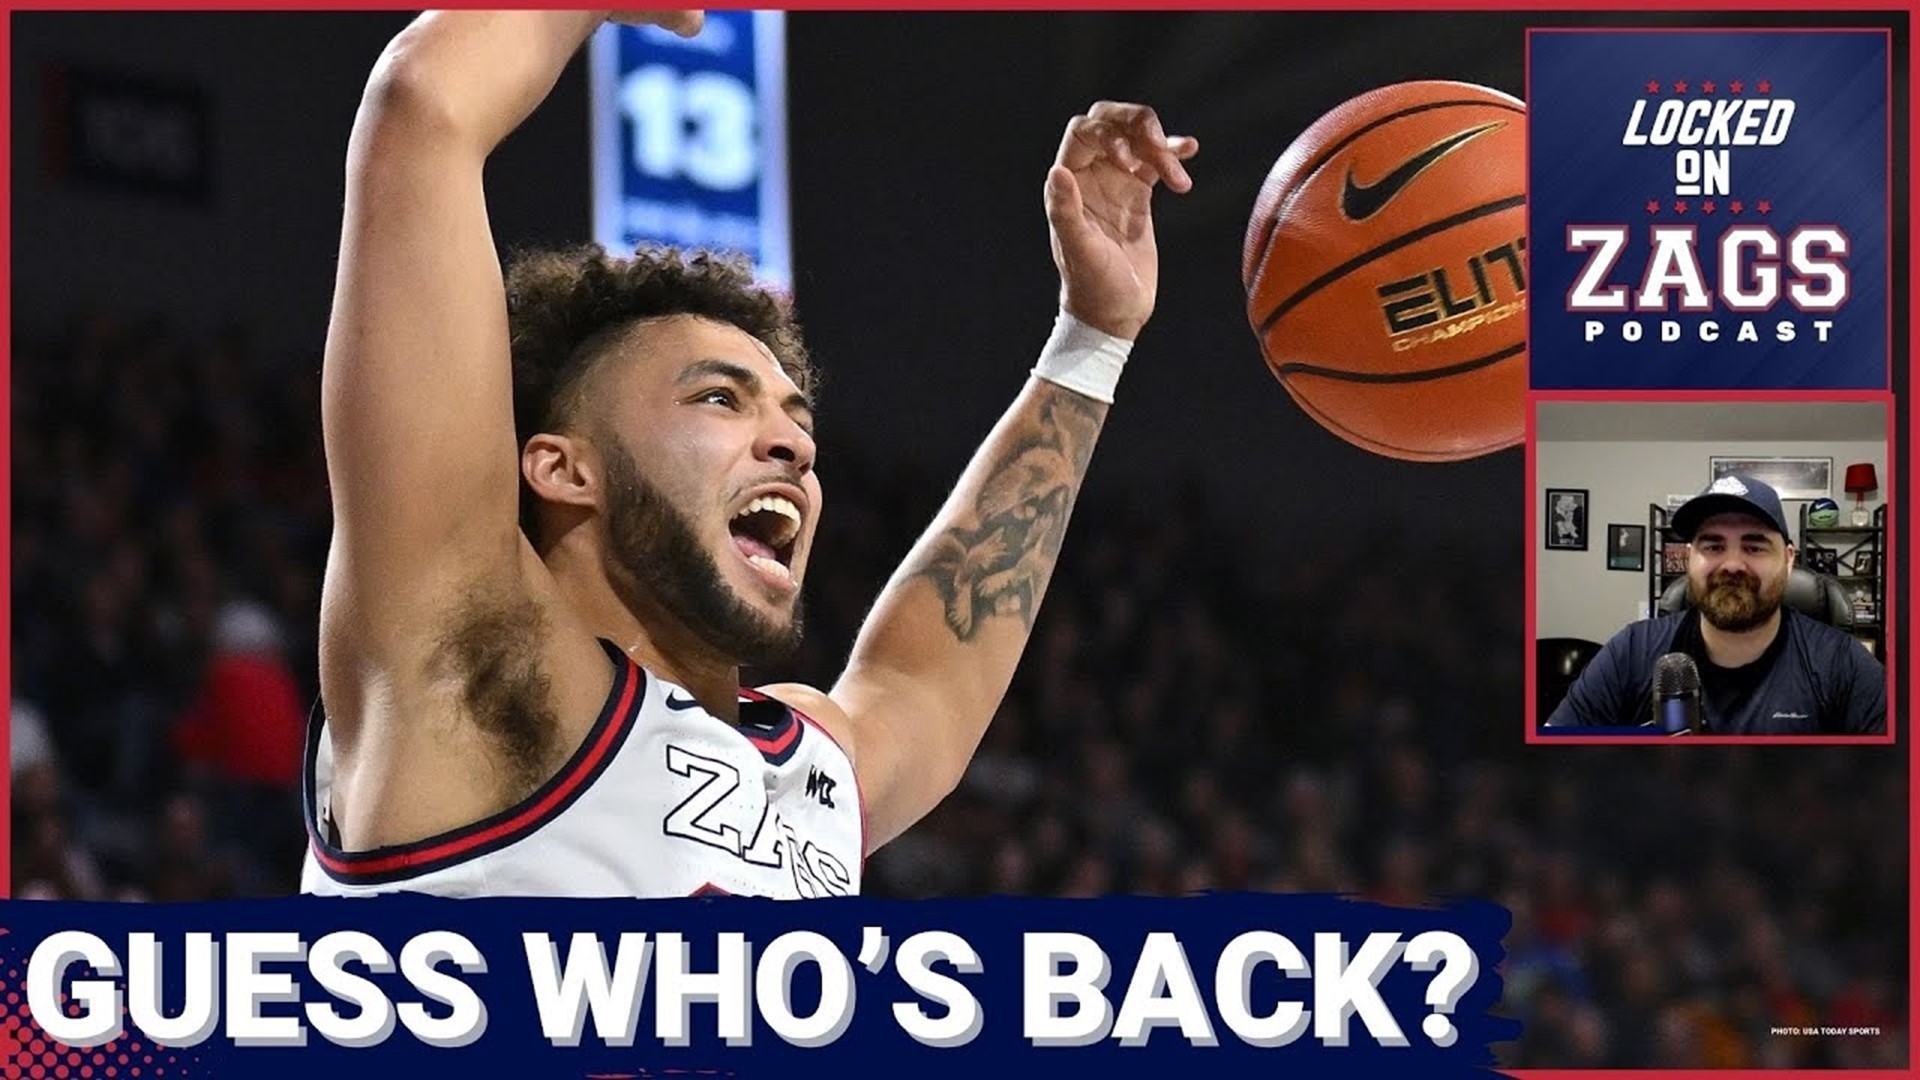 Mark Few and the Gonzaga Bulldogs are back in the College Basketball AP Top 25, coming in at No. 23 after a big win over Santa Clara on Saturday.